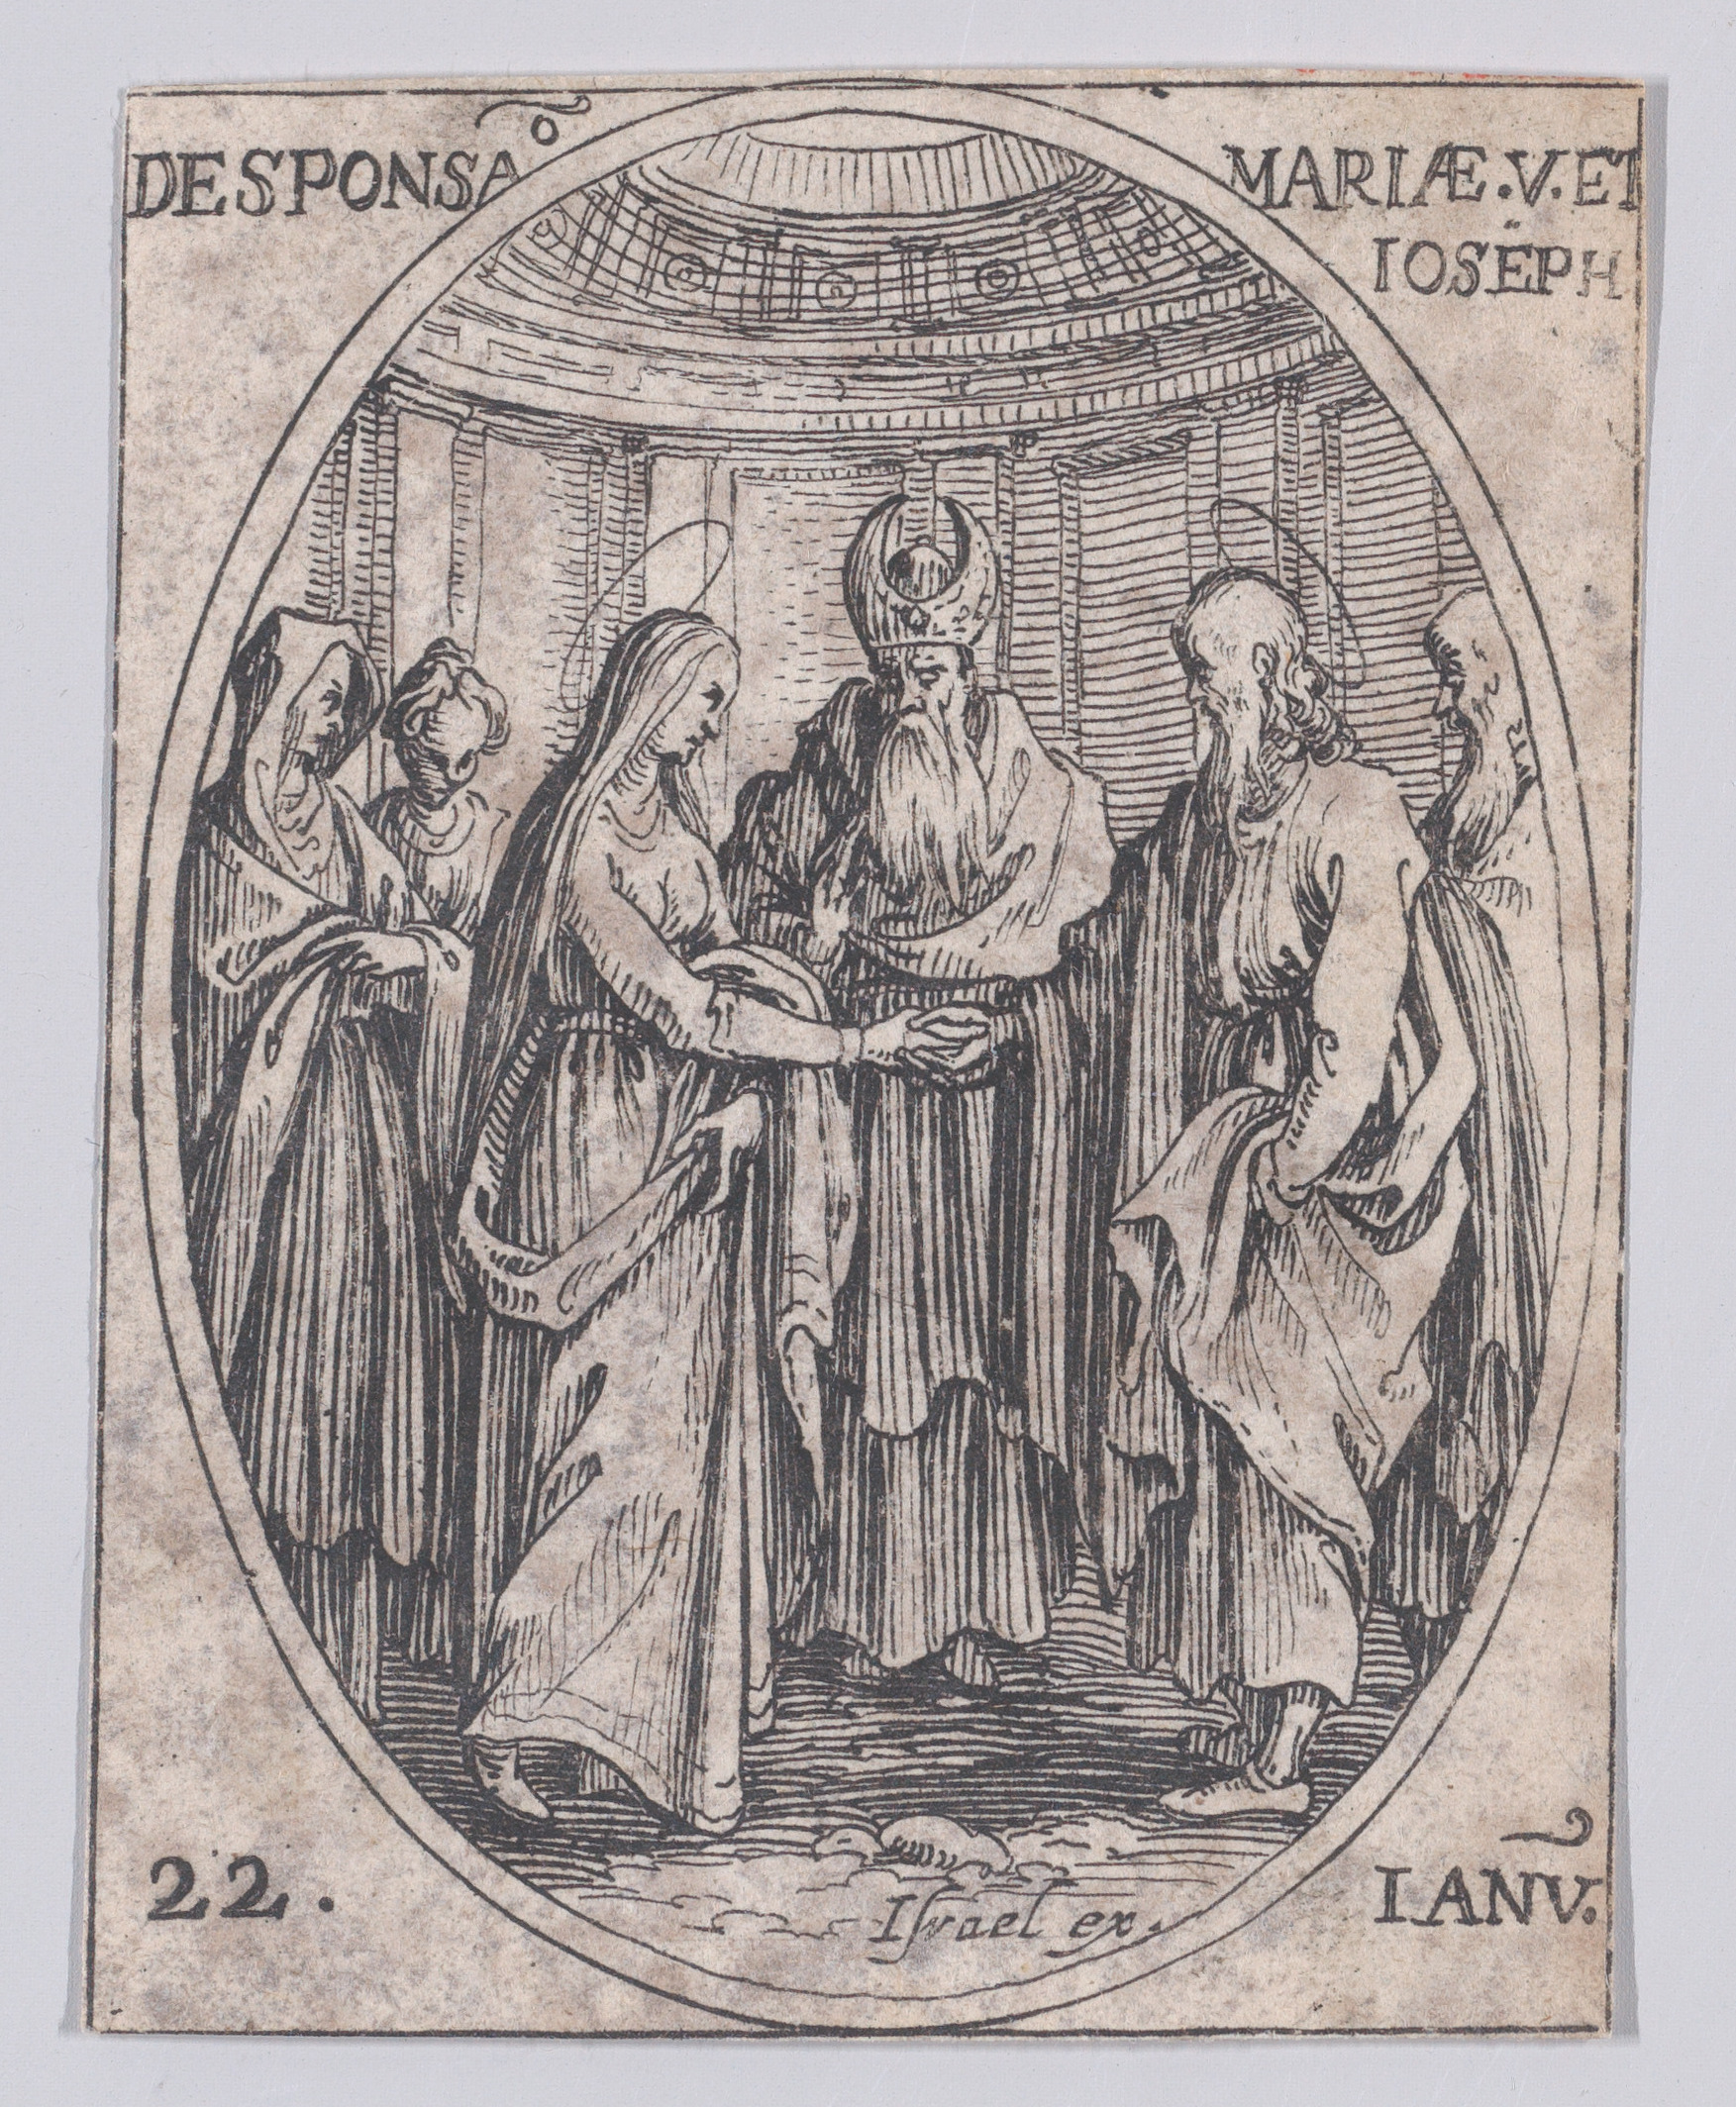 Le Mariage de la Ste. Vierge (The Marriage of the Virgin), January 22nd, from Les Images De Tous Les Saincts et Saintes de L'Année (Images of All of the Saints and Religious Events of the Year), Jacques Callot (French, Nancy 1592–1635 Nancy), Etching; second state of two (Lieure)